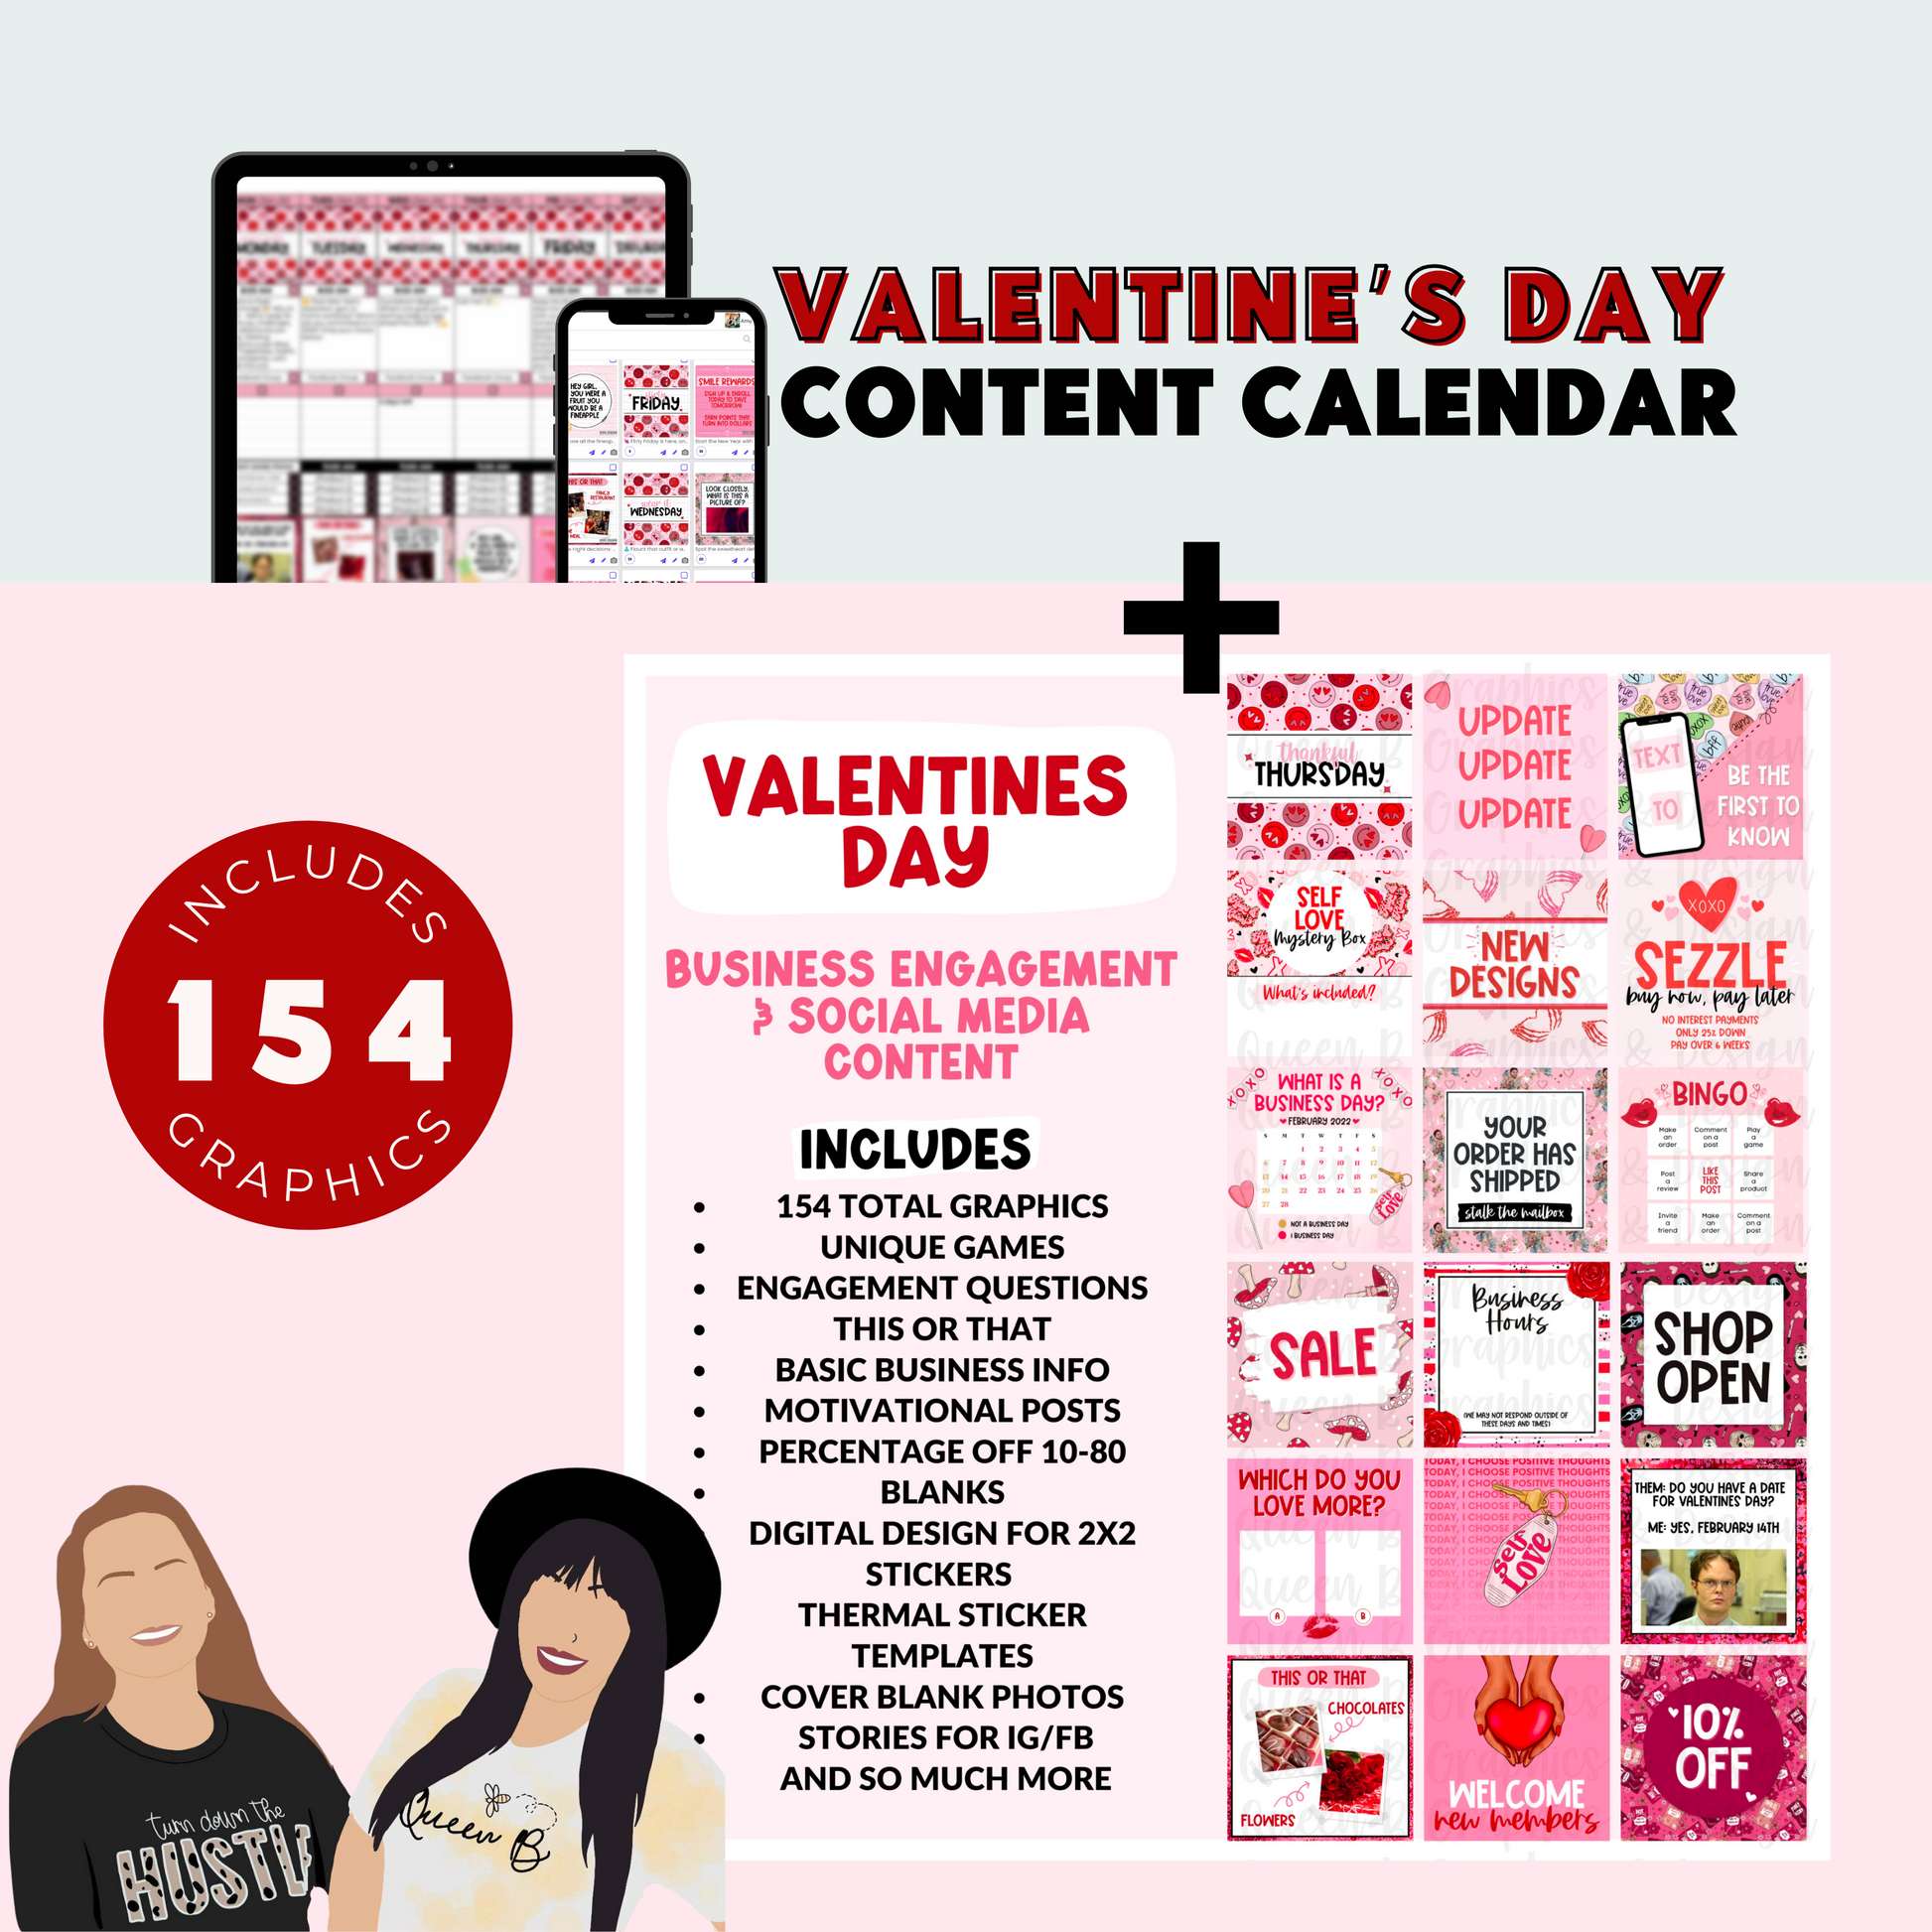 Valentine's Day Content Calendar themed social media plan | Sun Kissed Virtual Assistant